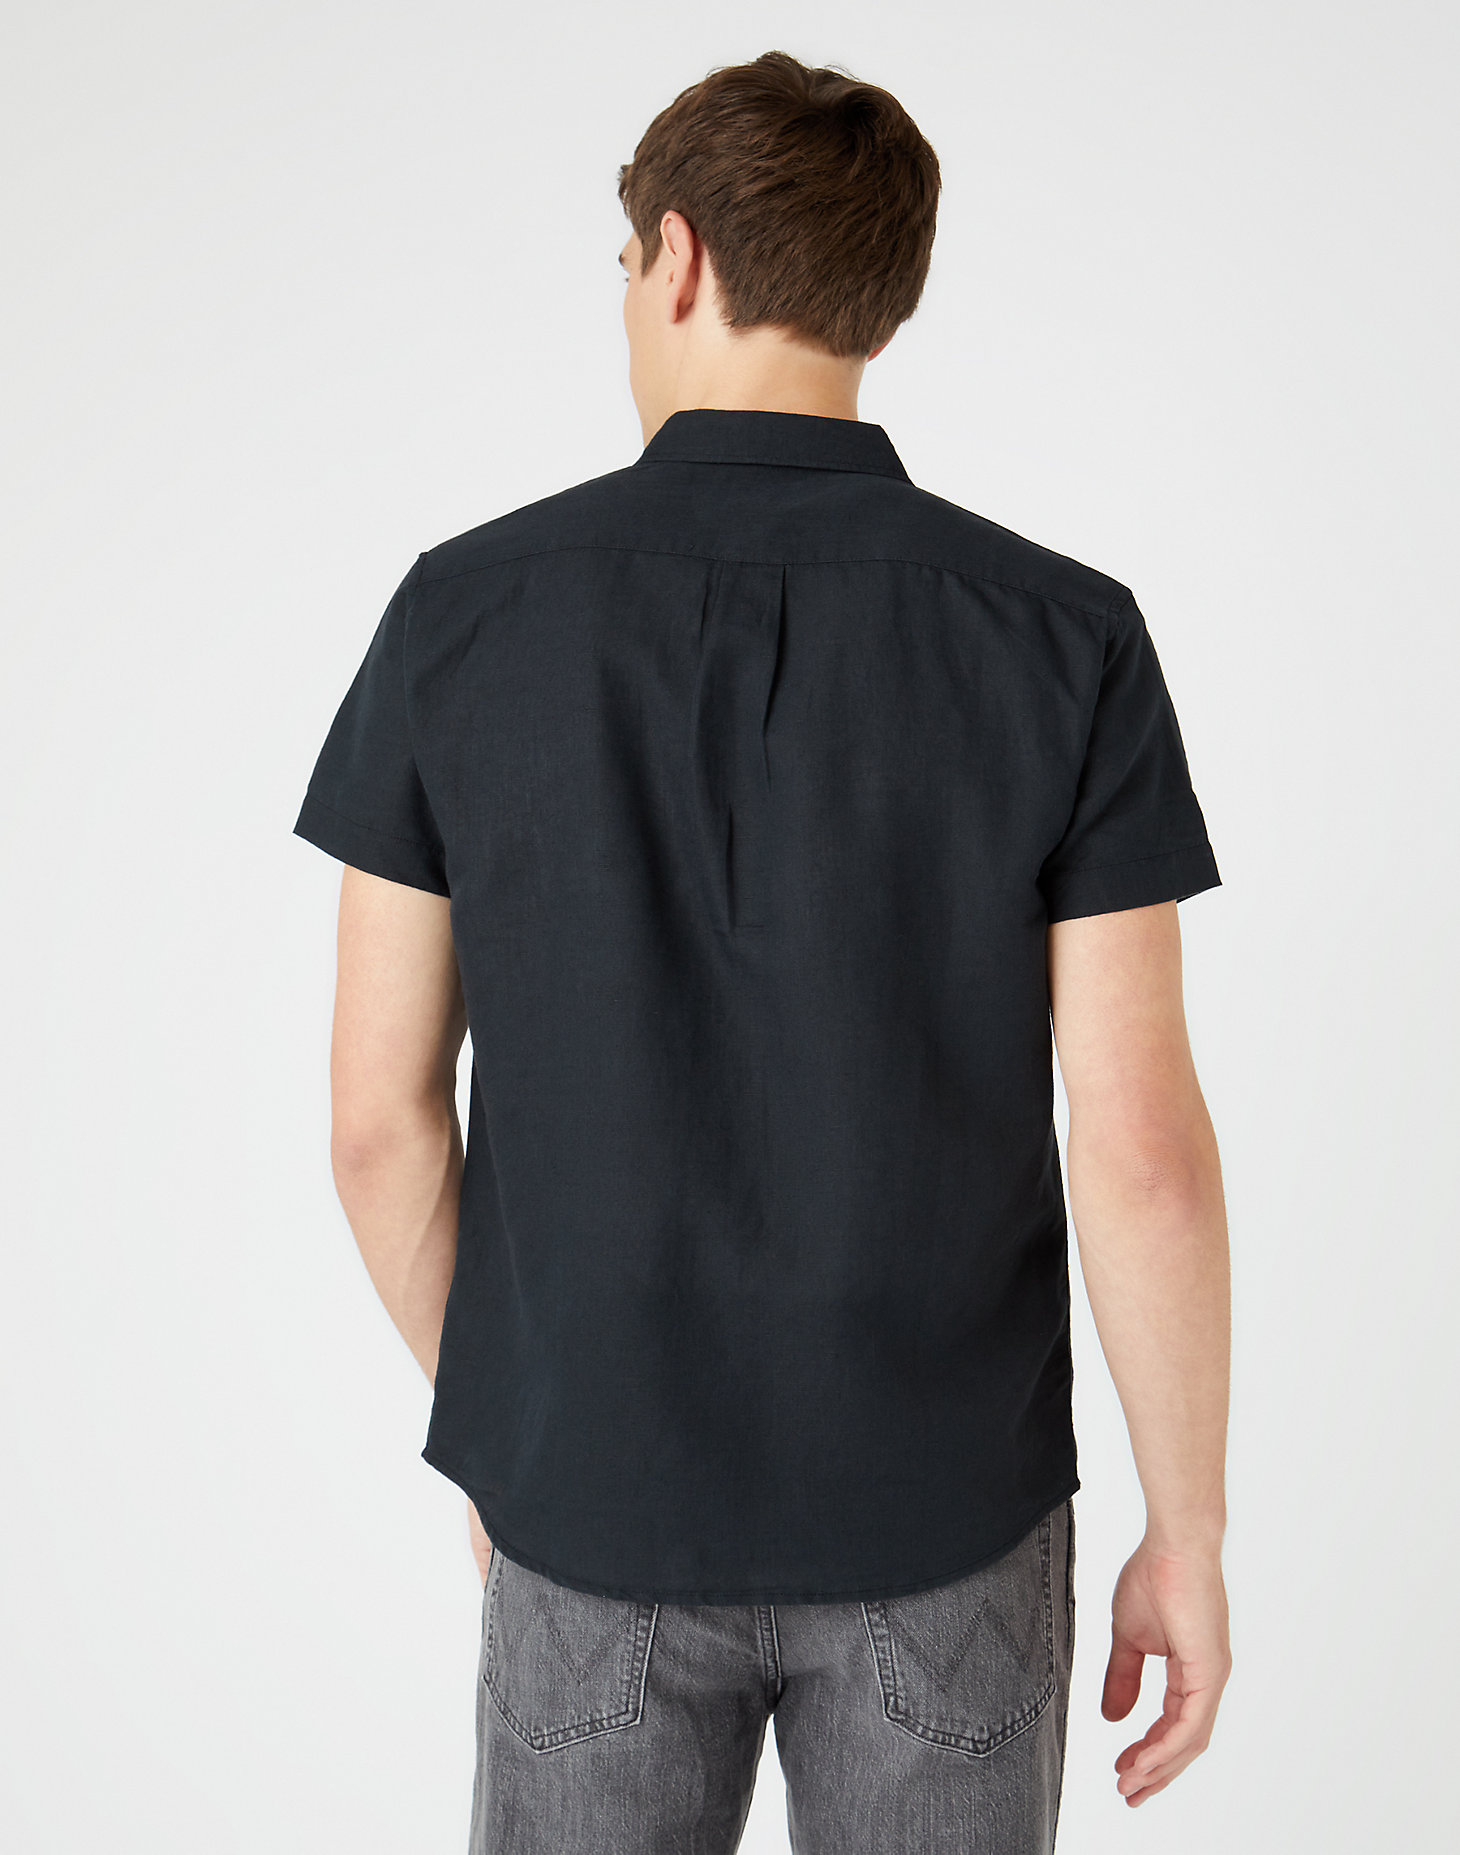 Short Sleeve One Pocket Shirt in Faded Black alternative view 2